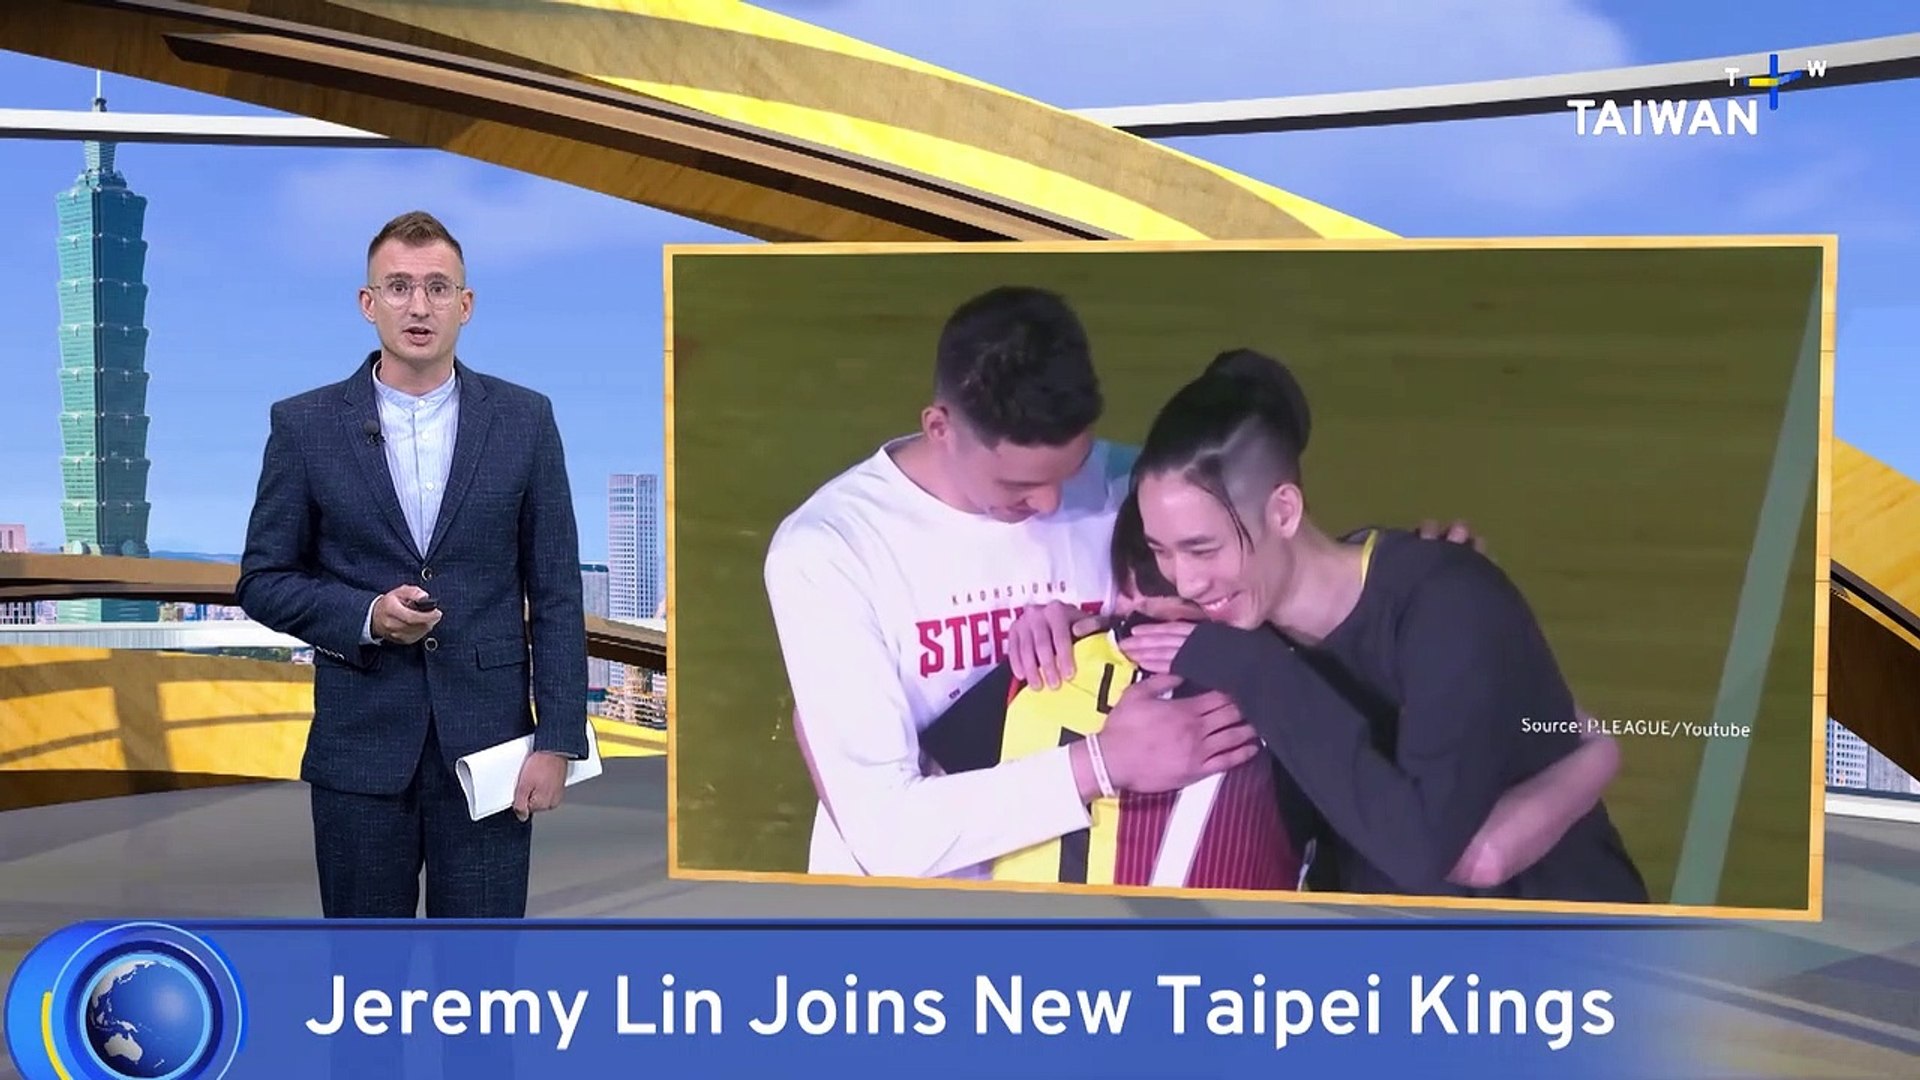 Basketball Star Jeremy Lin Signs With New Taipei Kings